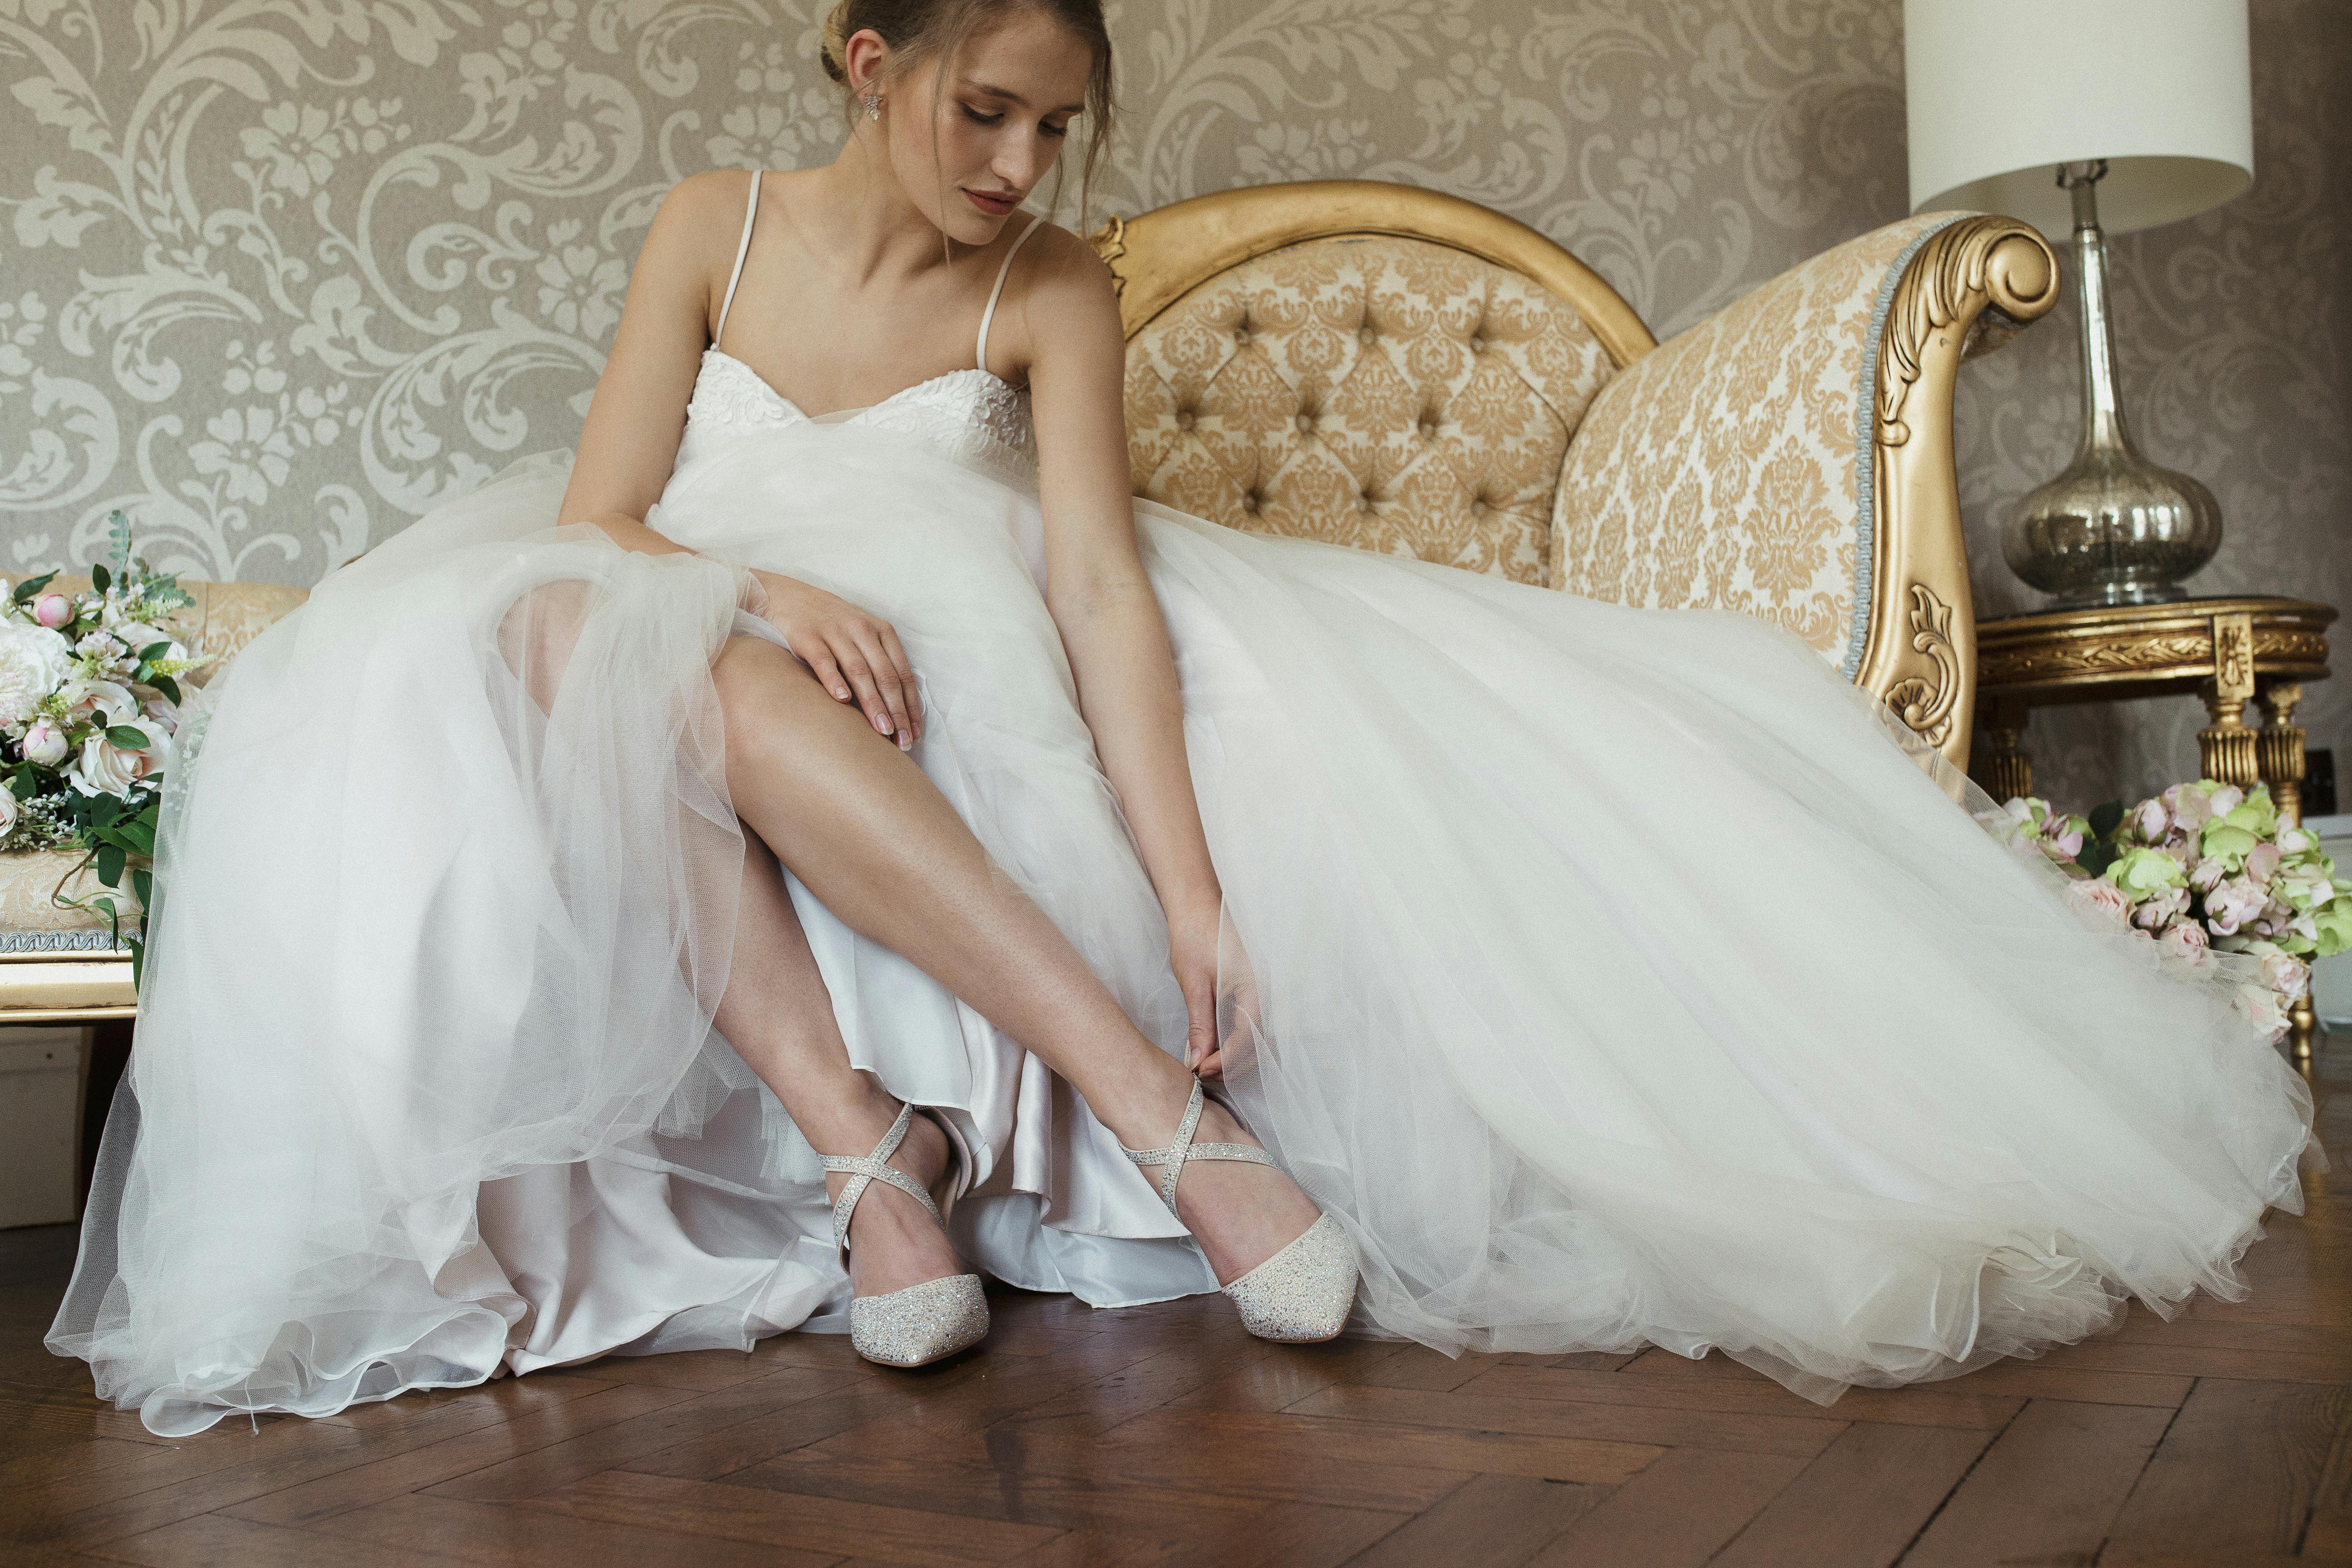 Bridal Accessories & Shoes | Designer Wedding Shoes to Walk the Aisle